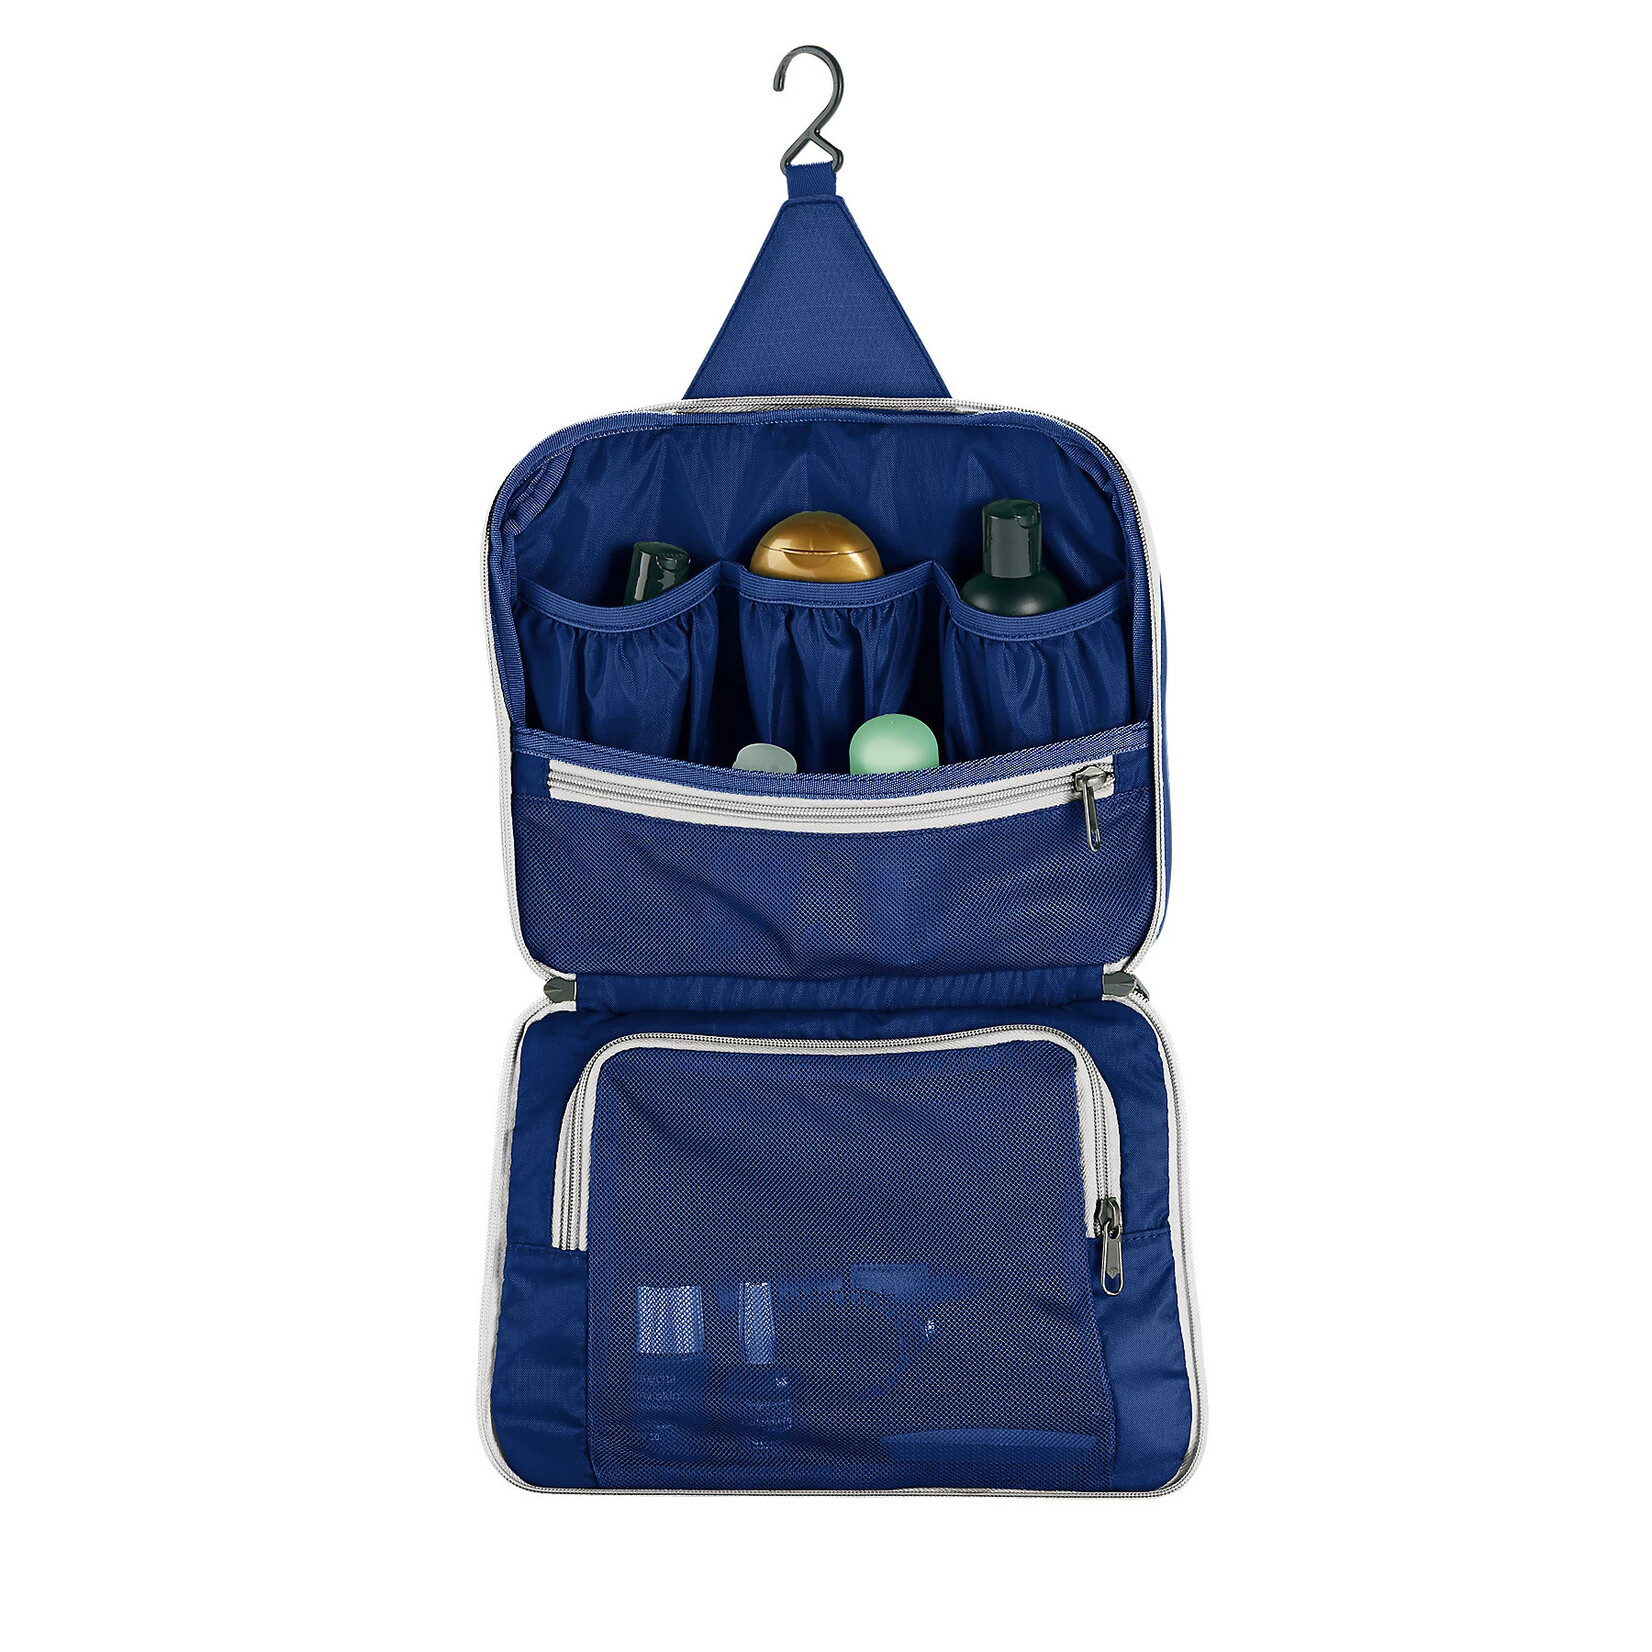 EAGLE CREEK PACK-IT REVEAL HANGING TOILETRY KIT